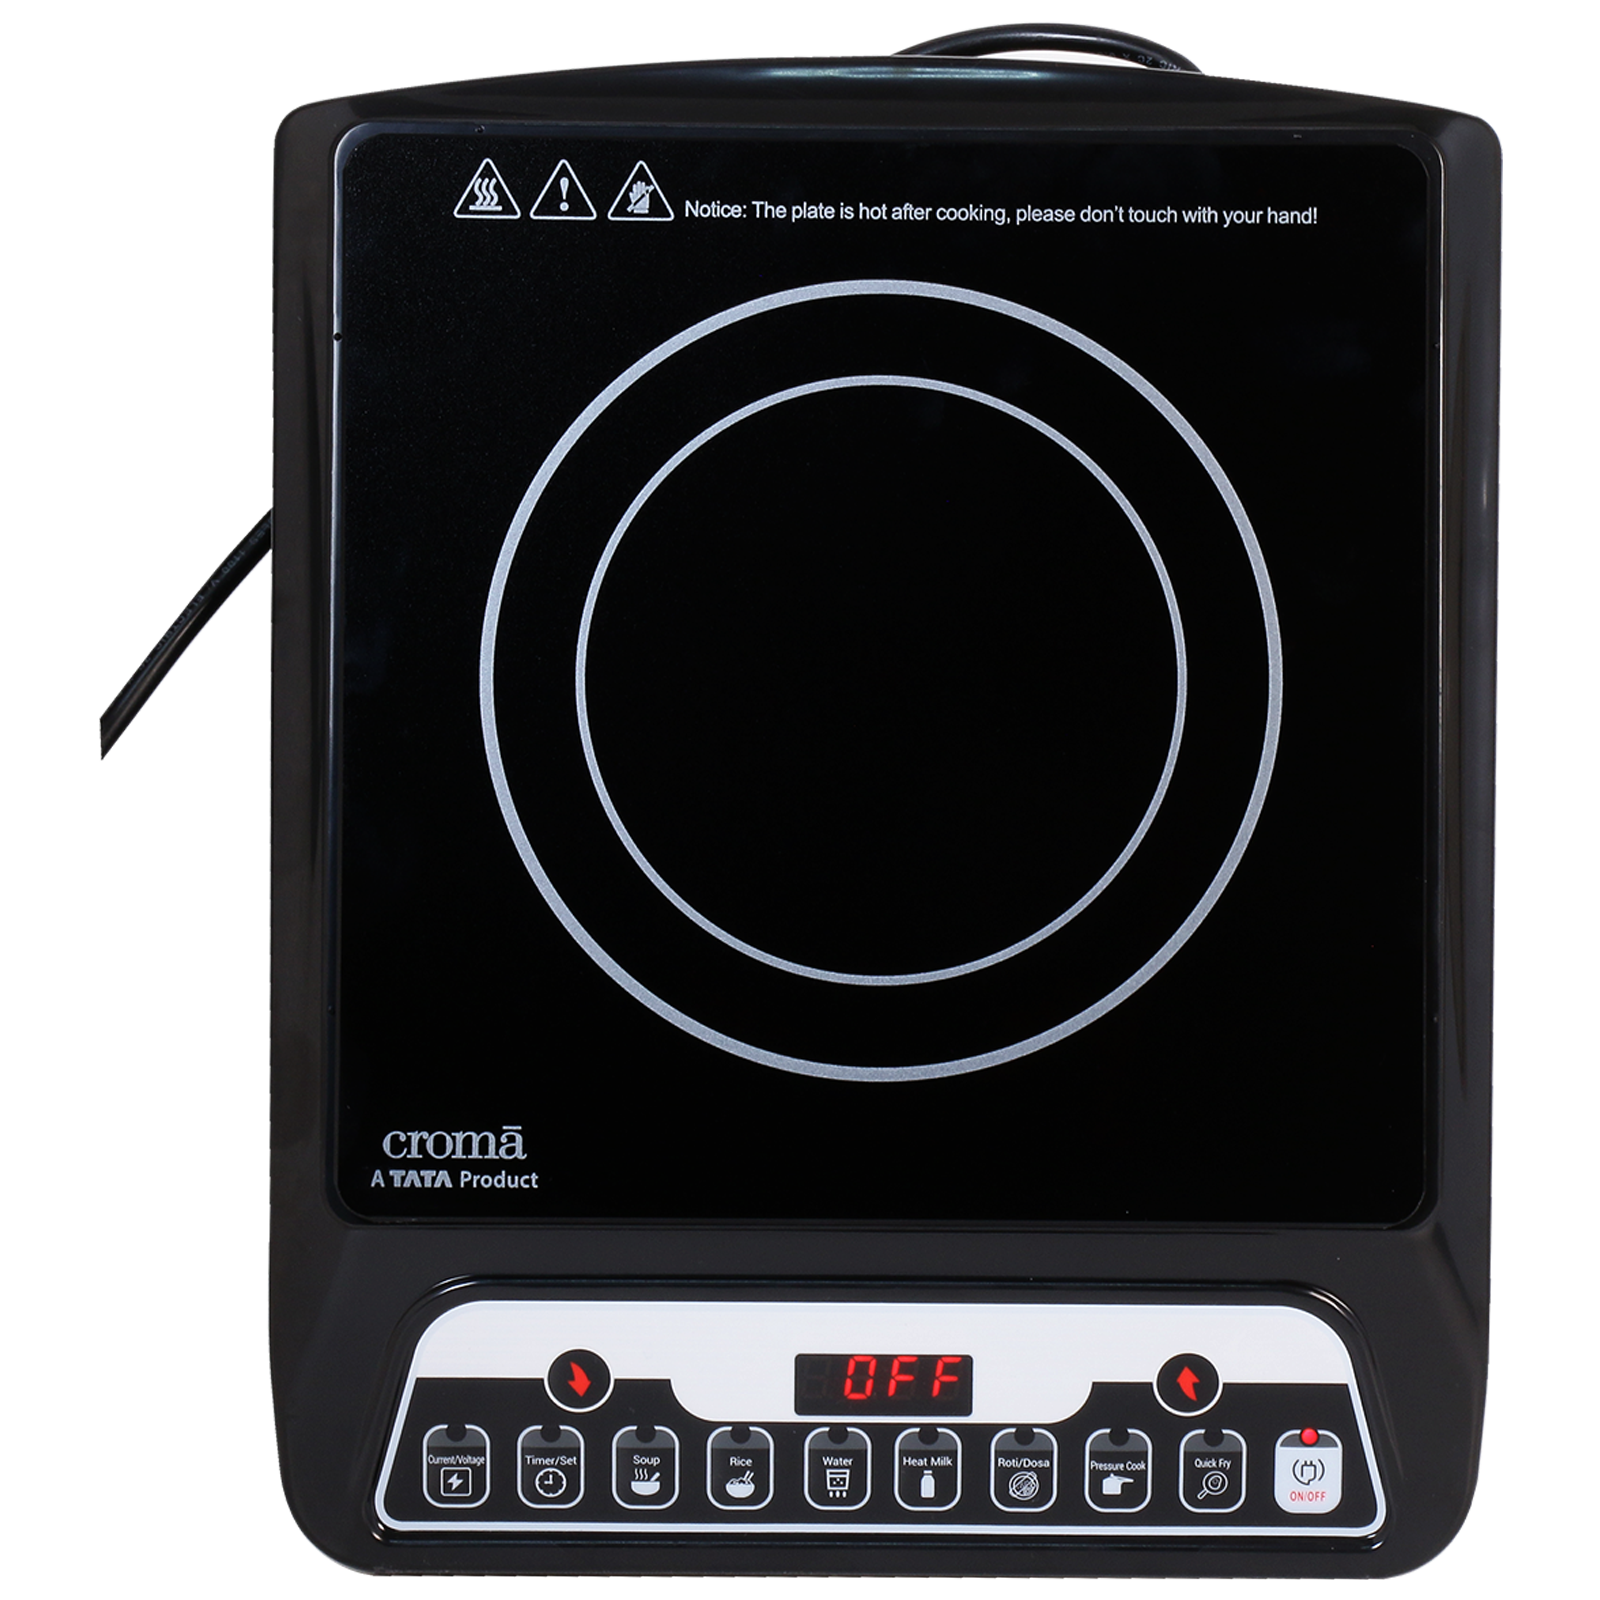 Croma Ceramic Glass 1200 Watts Induction Cooktop (Auto Shut-off, CRSK140ICA266101, Black and Silver)_1